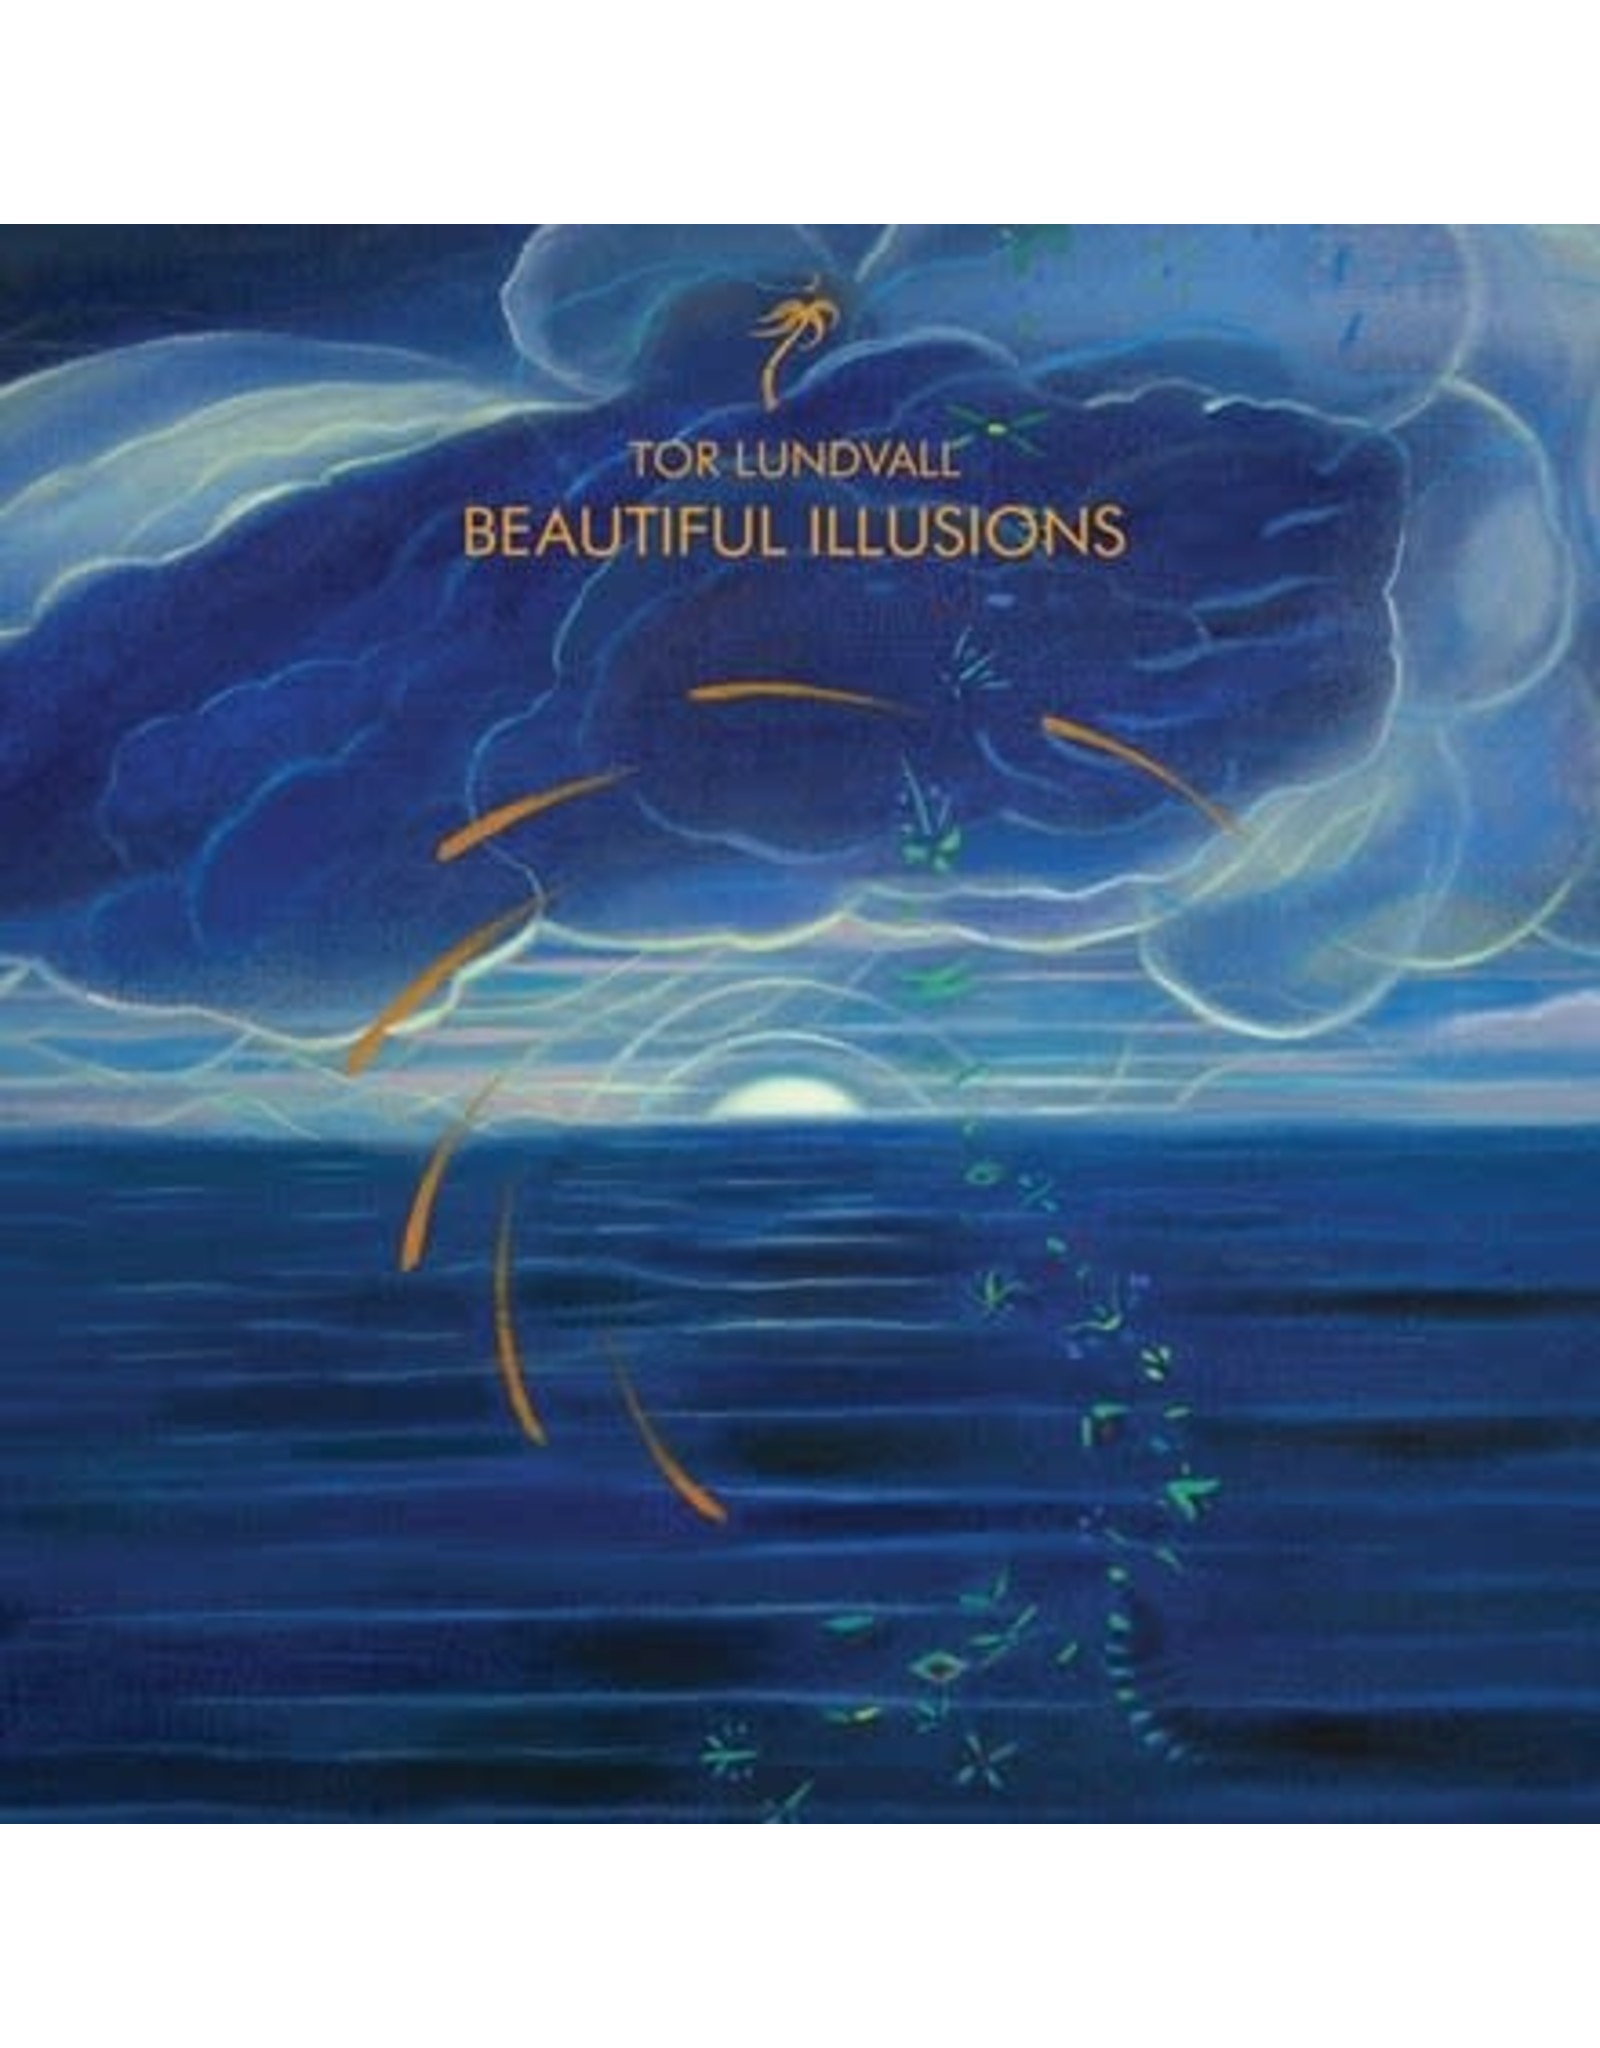 Dais Lundvall, Tor: Beautiful Illusions (clear blue) LP